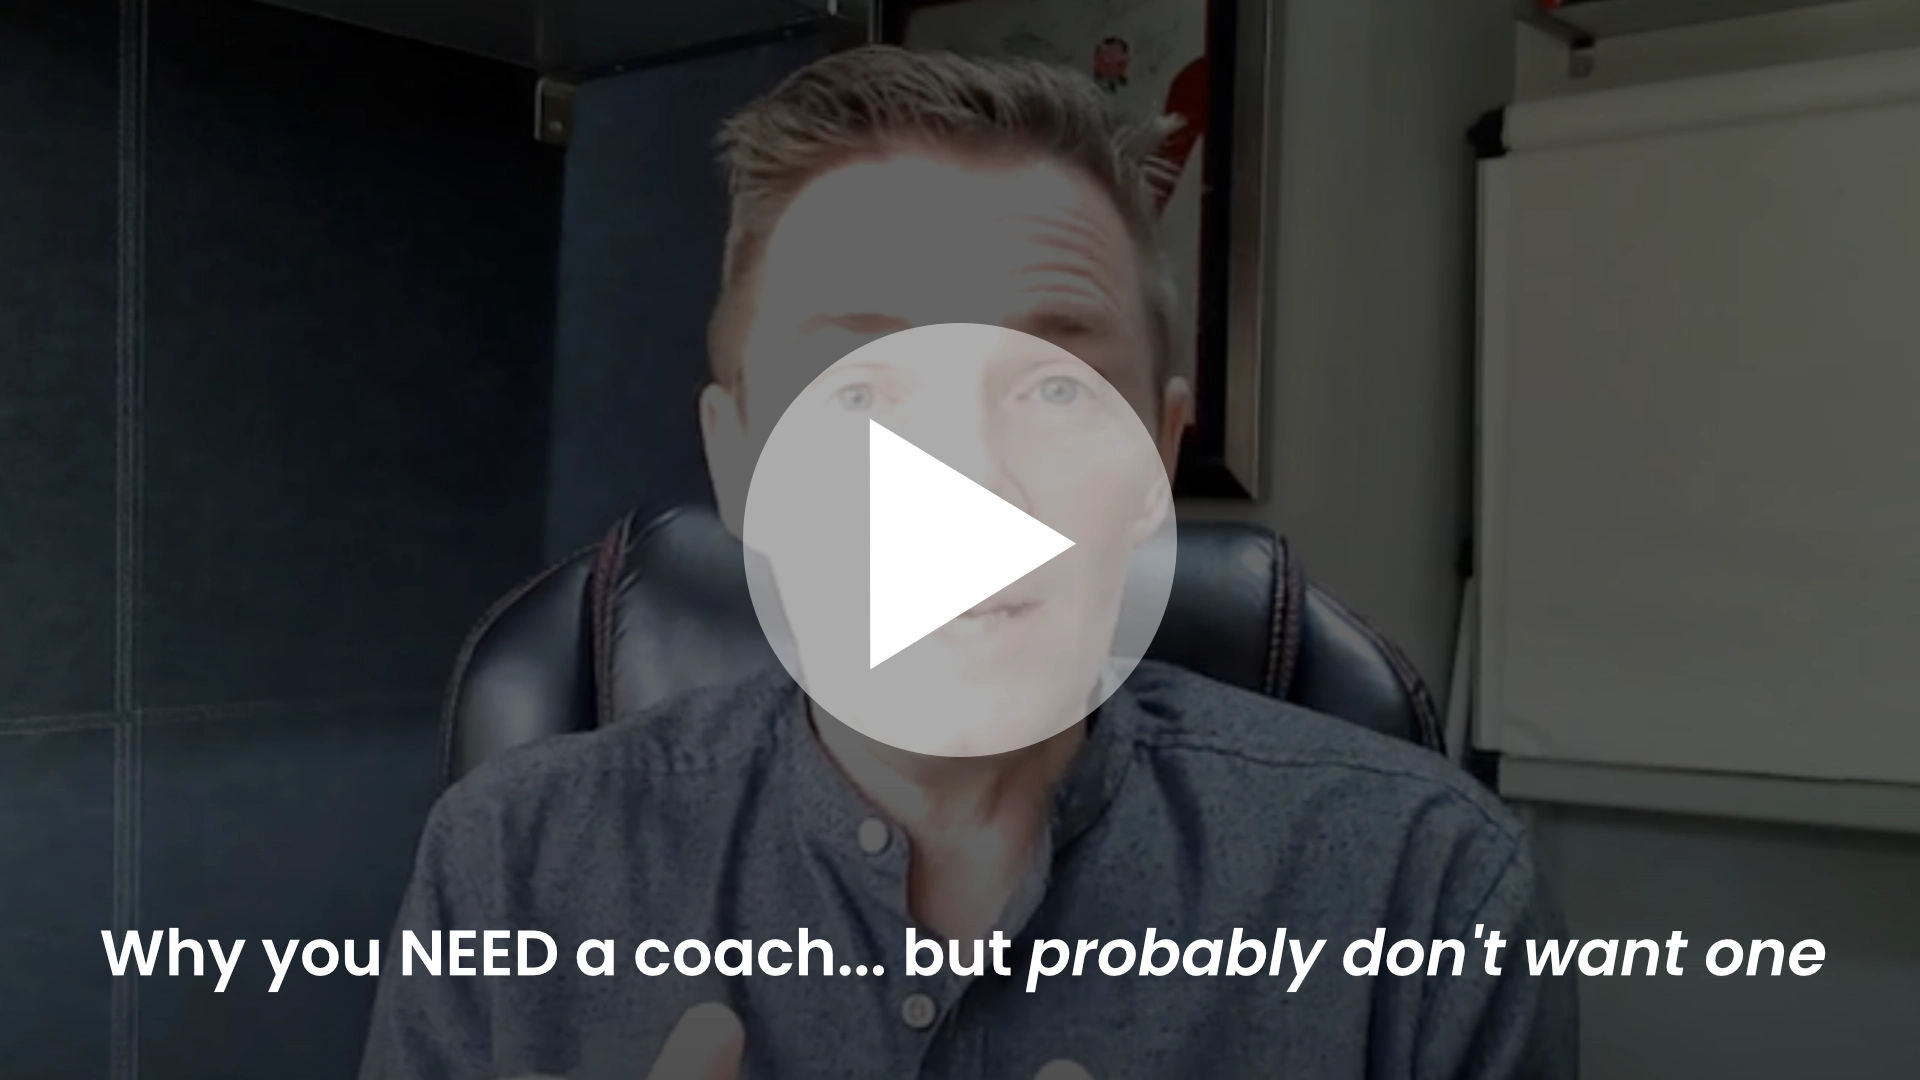 Why you need a coach, but probably don't want one